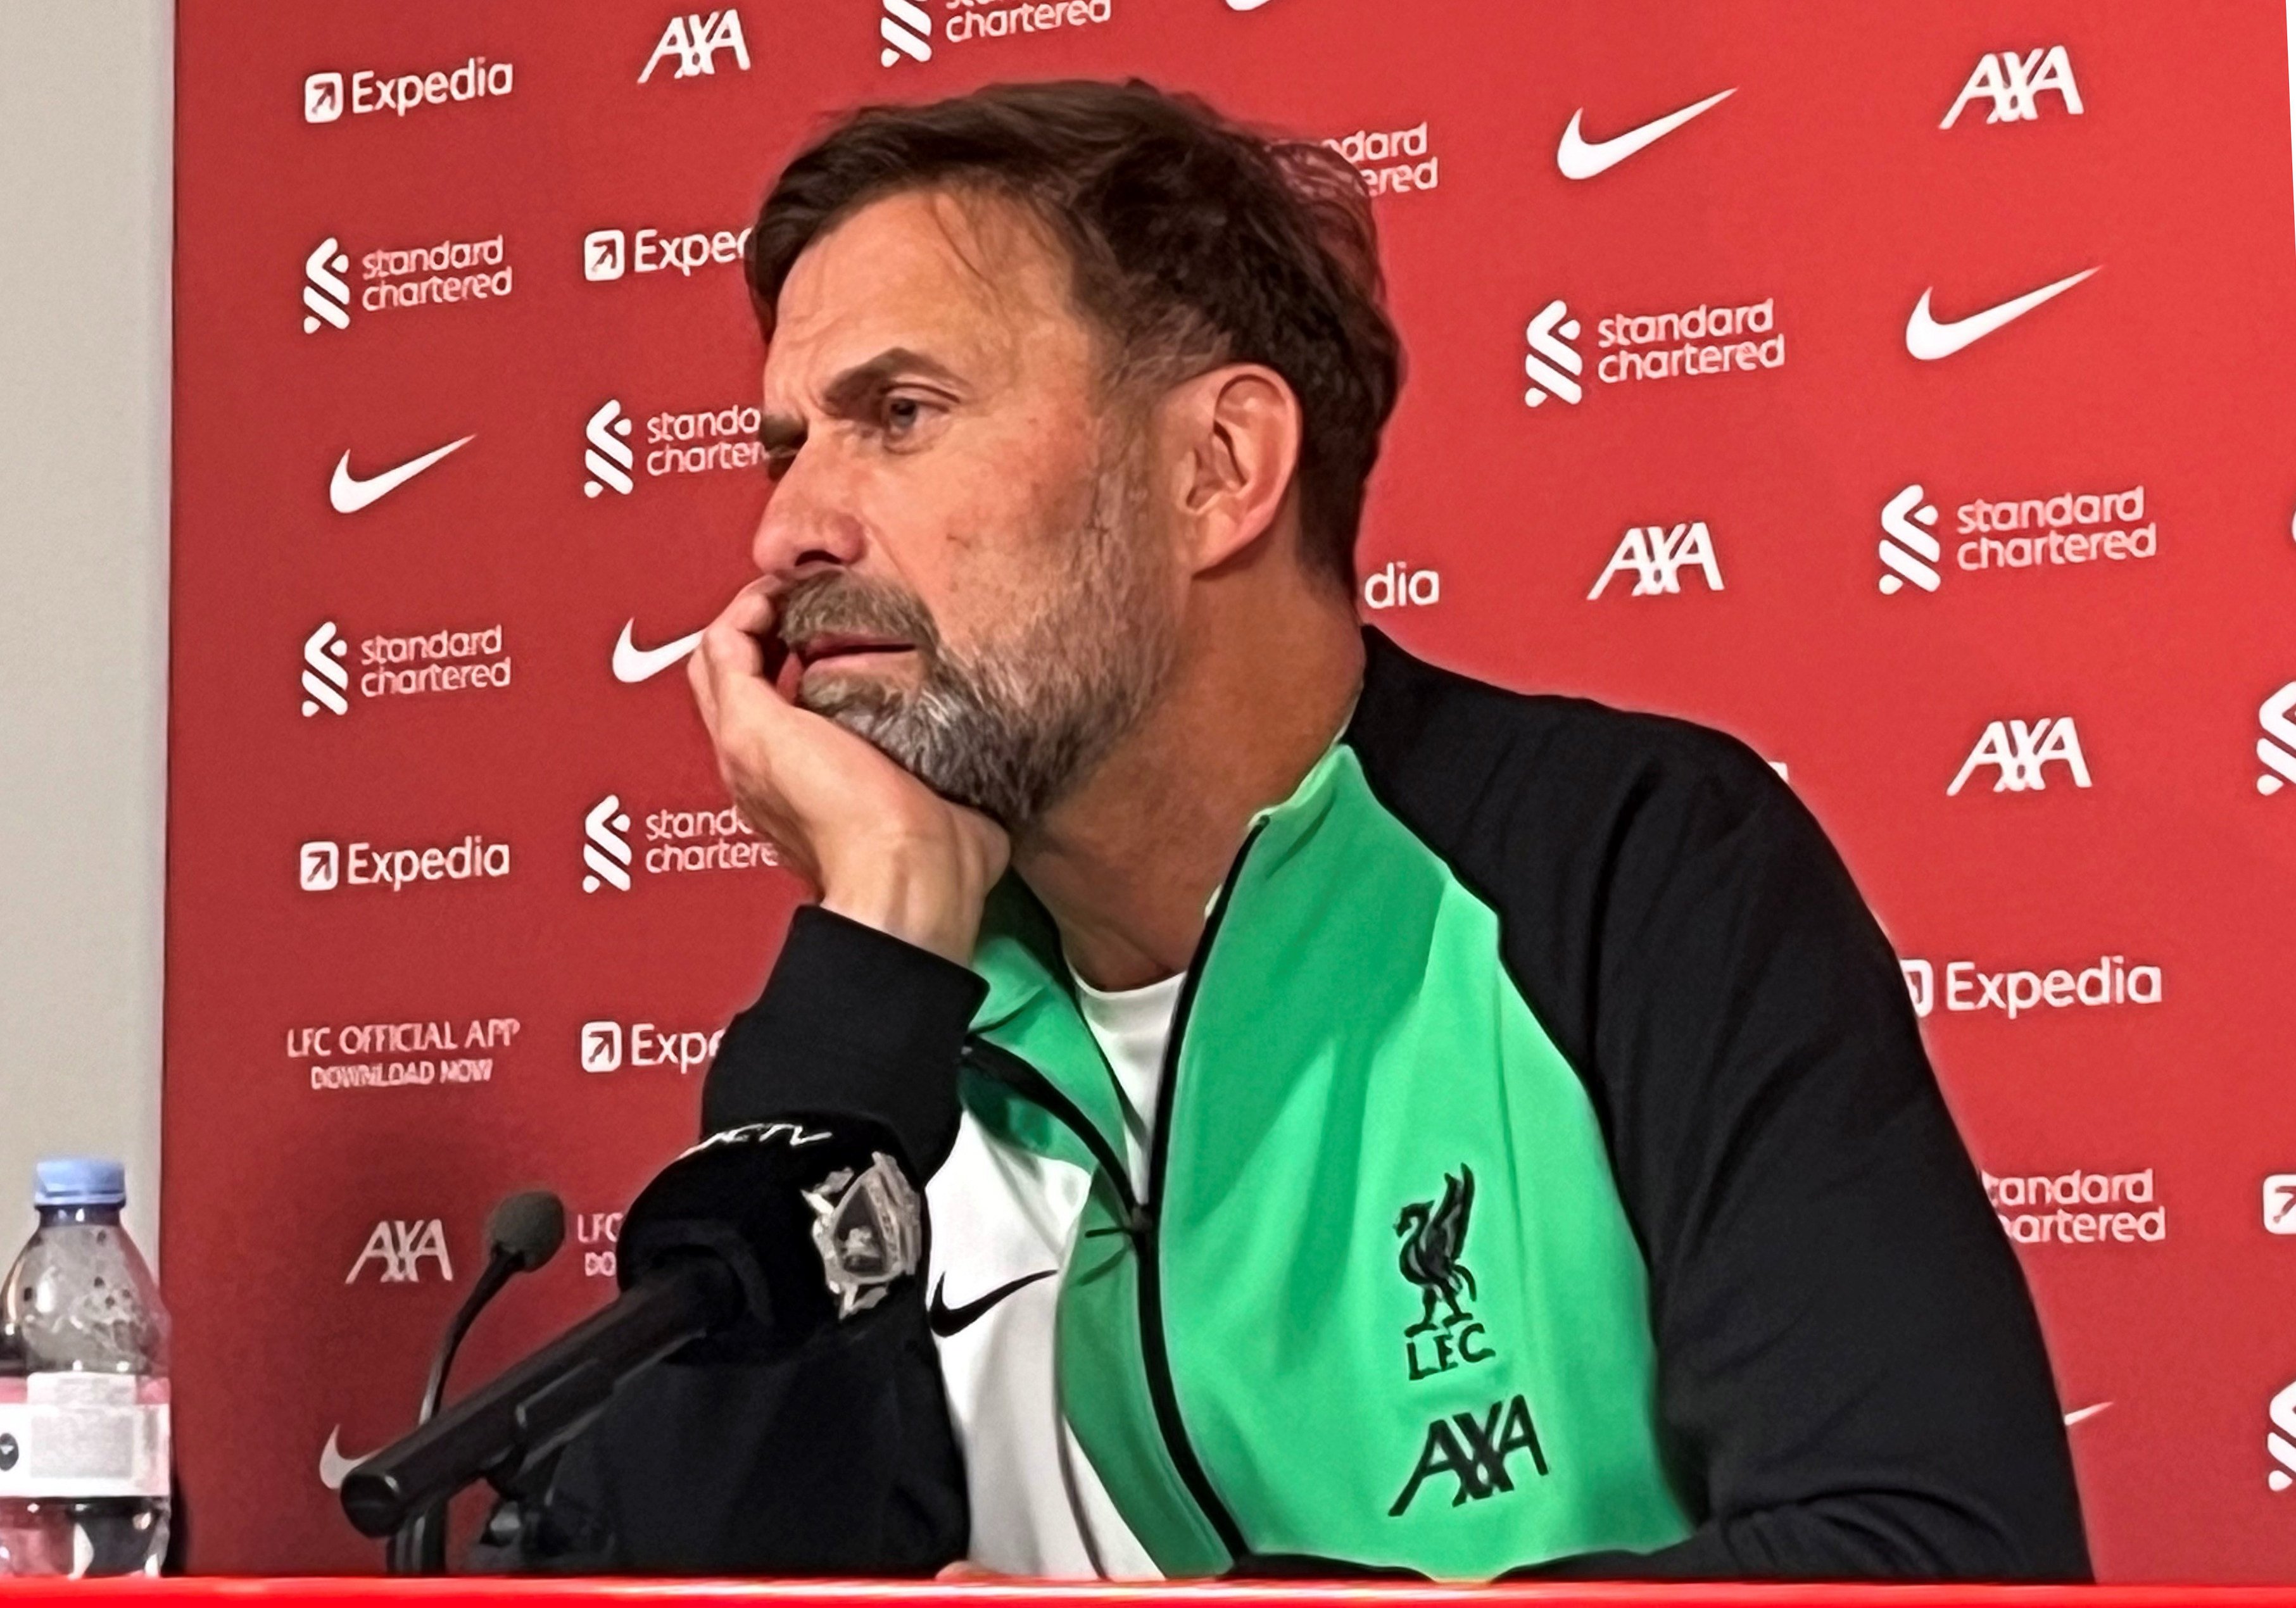 Liverpool manager Jurgen Klopp speaks during a press conference after announcing he was standing down as manager at the end of the season. Photo: DPA